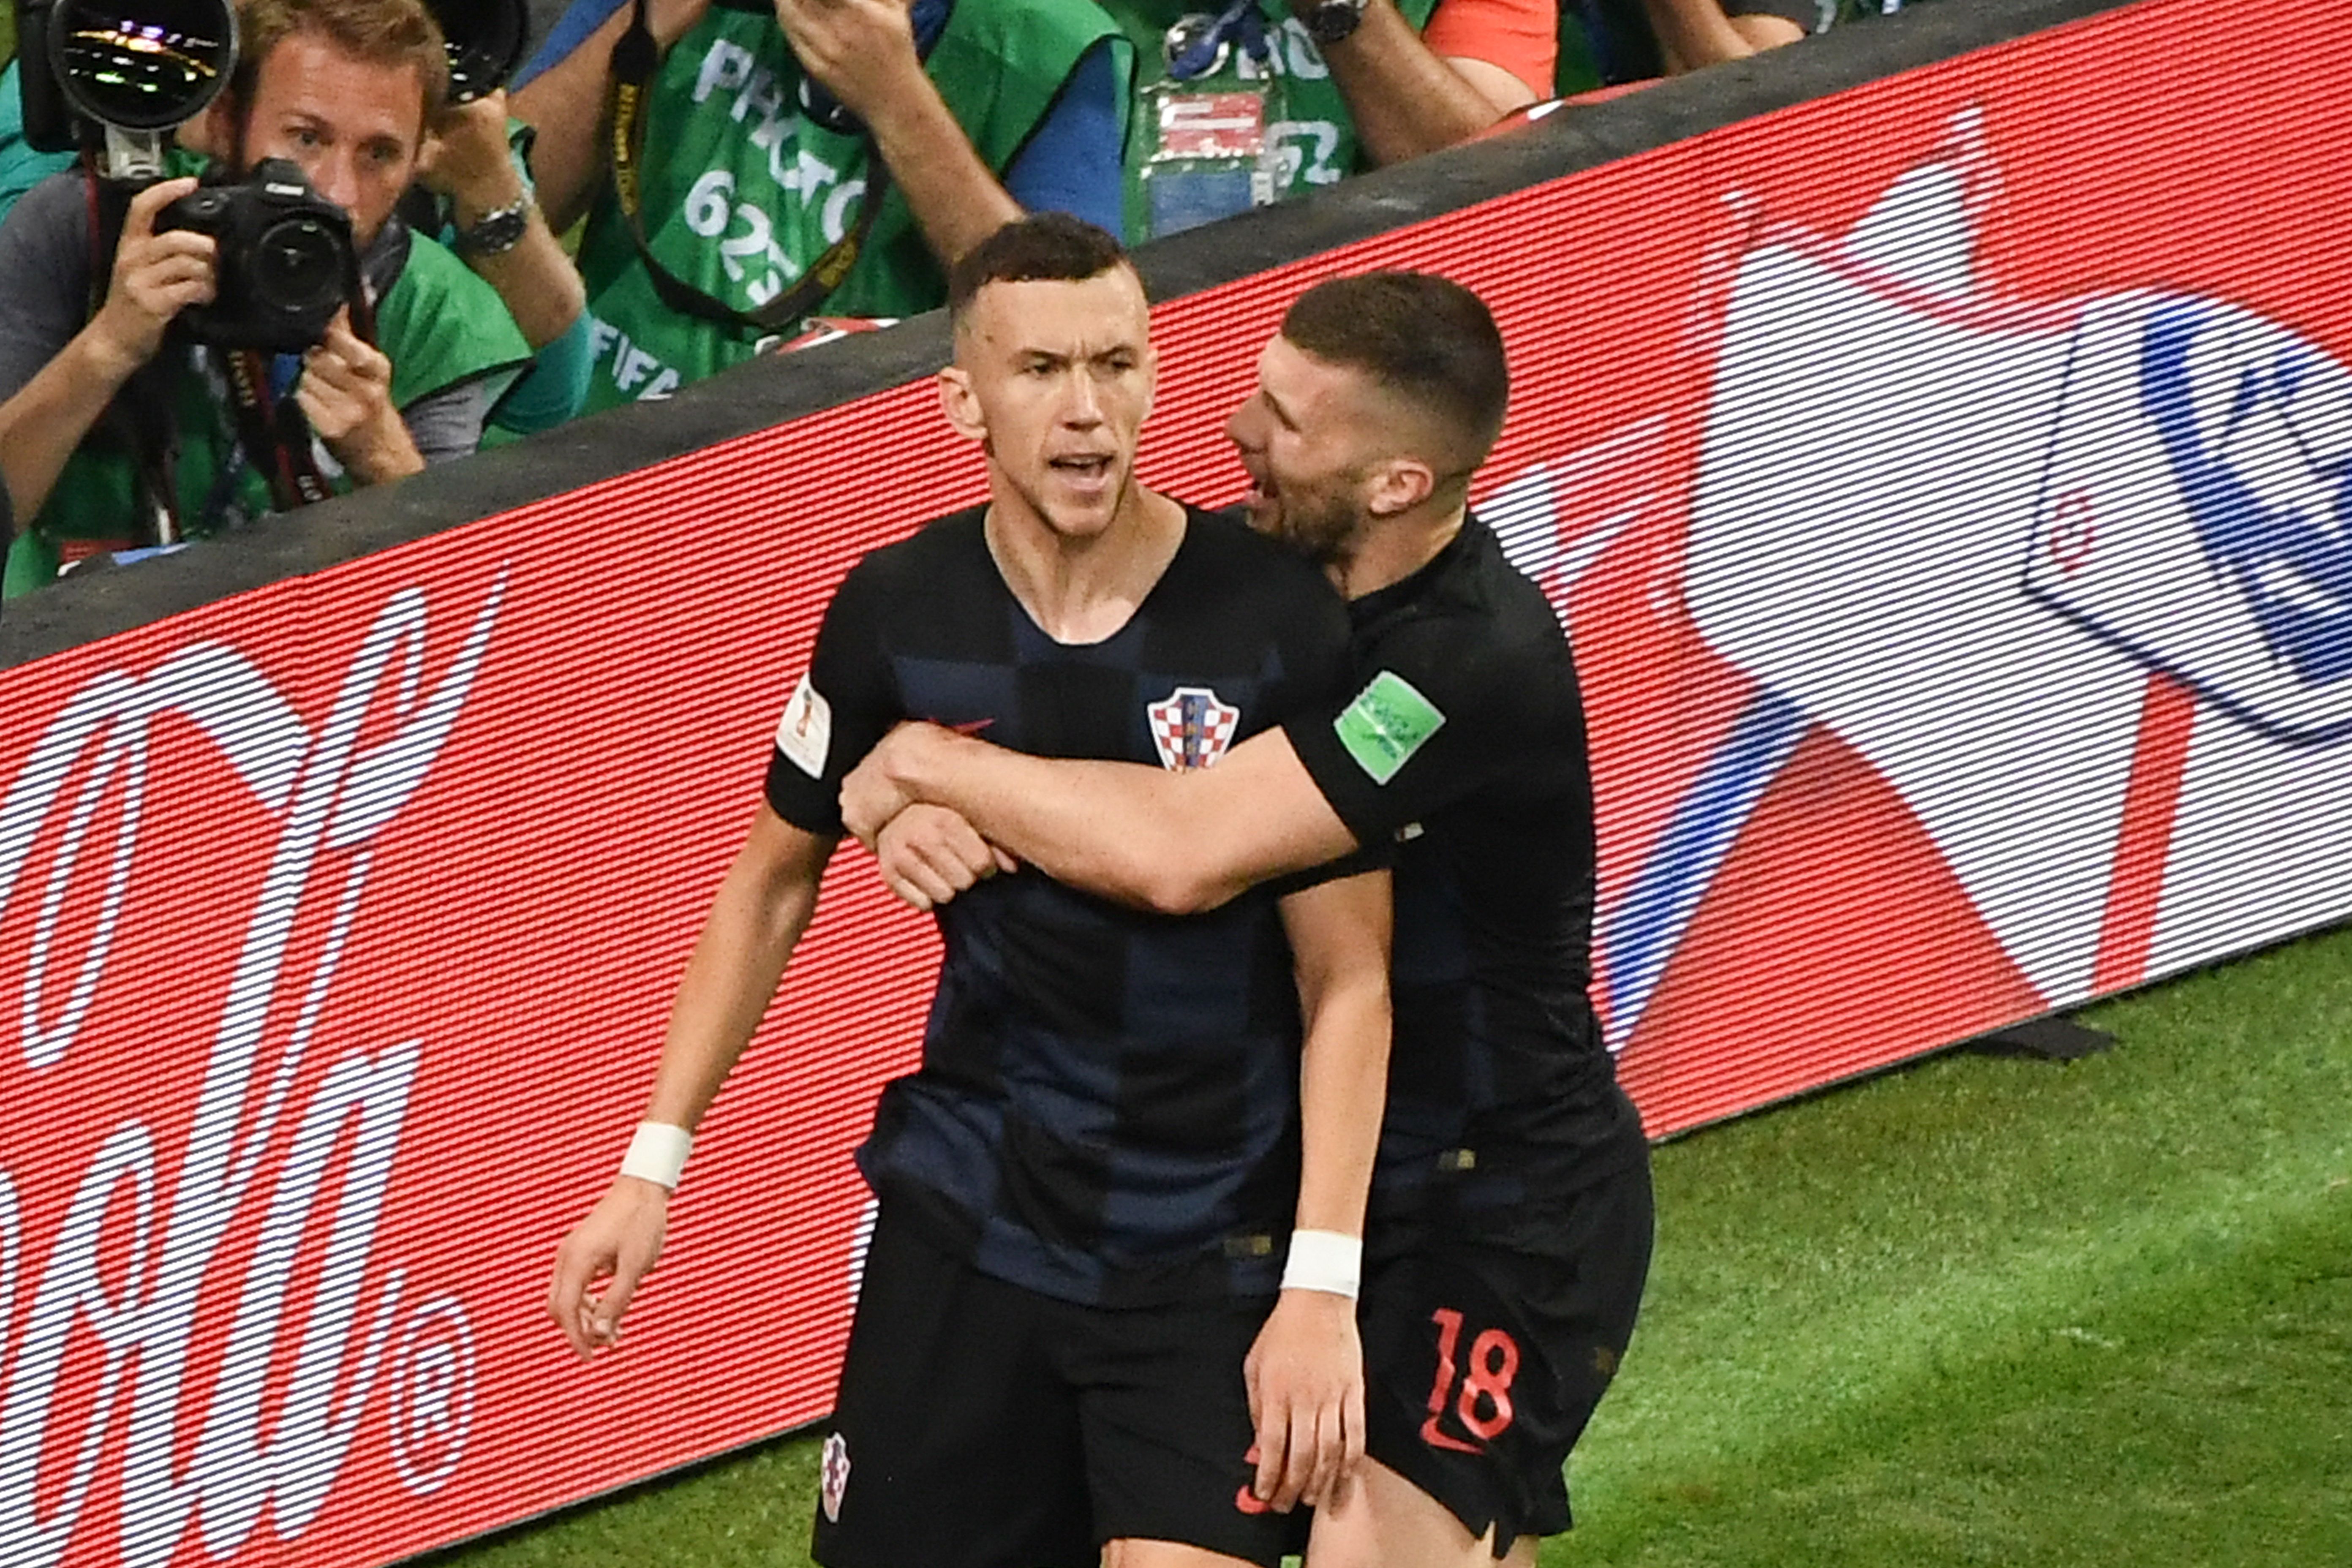 Croatia's forward Ivan Perisic (L) celebrates with Croatia's forward Ante Rebic after scoring his team's first goal  during the Russia 2018 World Cup semi-final football match between Croatia and England at the Luzhniki Stadium in Moscow on July 11, 2018. (Photo by Jewel SAMAD / AFP) / RESTRICTED TO EDITORIAL USE - NO MOBILE PUSH ALERTS/DOWNLOADS        (Photo credit should read JEWEL SAMAD/AFP/Getty Images)